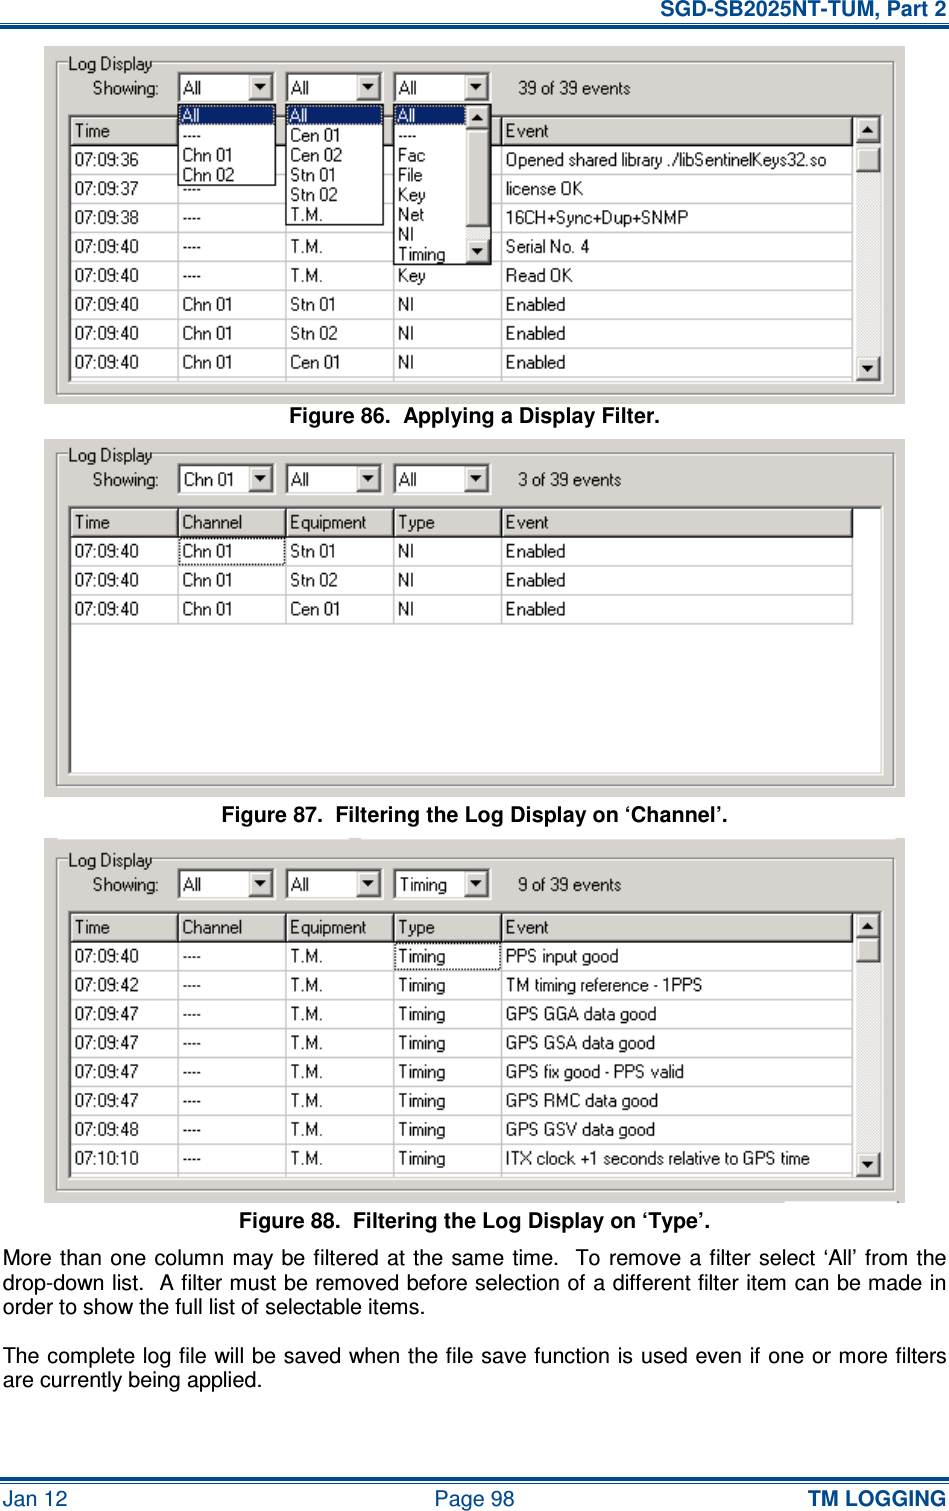   SGD-SB2025NT-TUM, Part 2 Jan 12  Page 98 TM LOGGING Figure 86.  Applying a Display Filter. Figure 87.  Filtering the Log Display on ‘Channel’. Figure 88.  Filtering the Log Display on ‘Type’. More than one column  may be filtered at the same time.   To remove a filter select ‘All’ from the drop-down list.  A filter must be removed before selection of a different filter item can be made in order to show the full list of selectable items. The complete log file will be saved when the file save function is used even if one or more filters are currently being applied. 